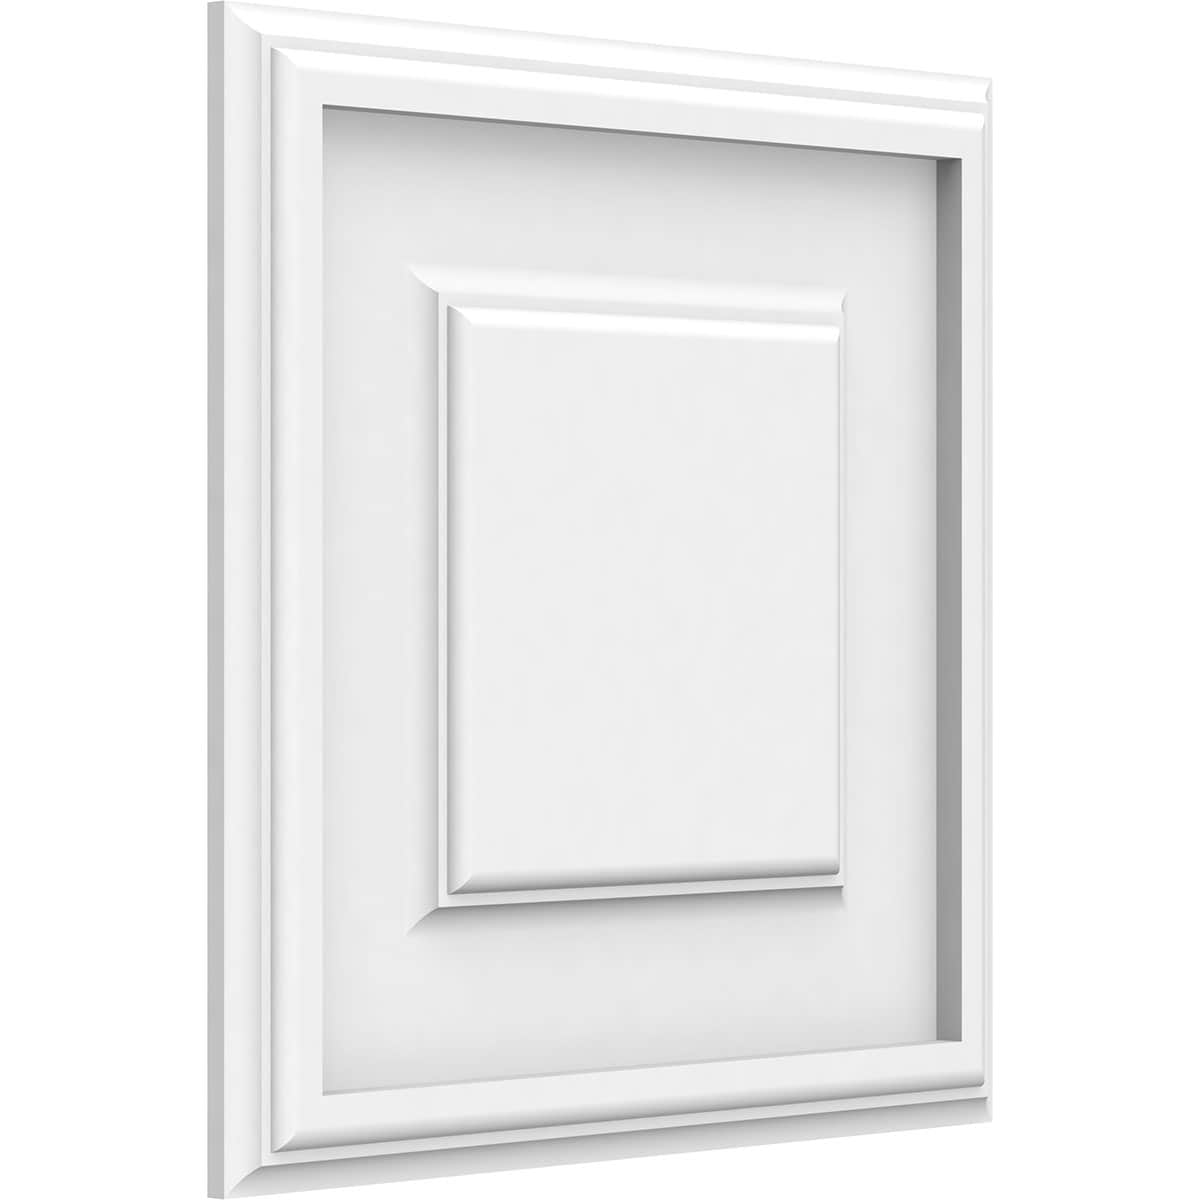 12 Inch Wide Wainscoting Wall Panels at Lowes.com